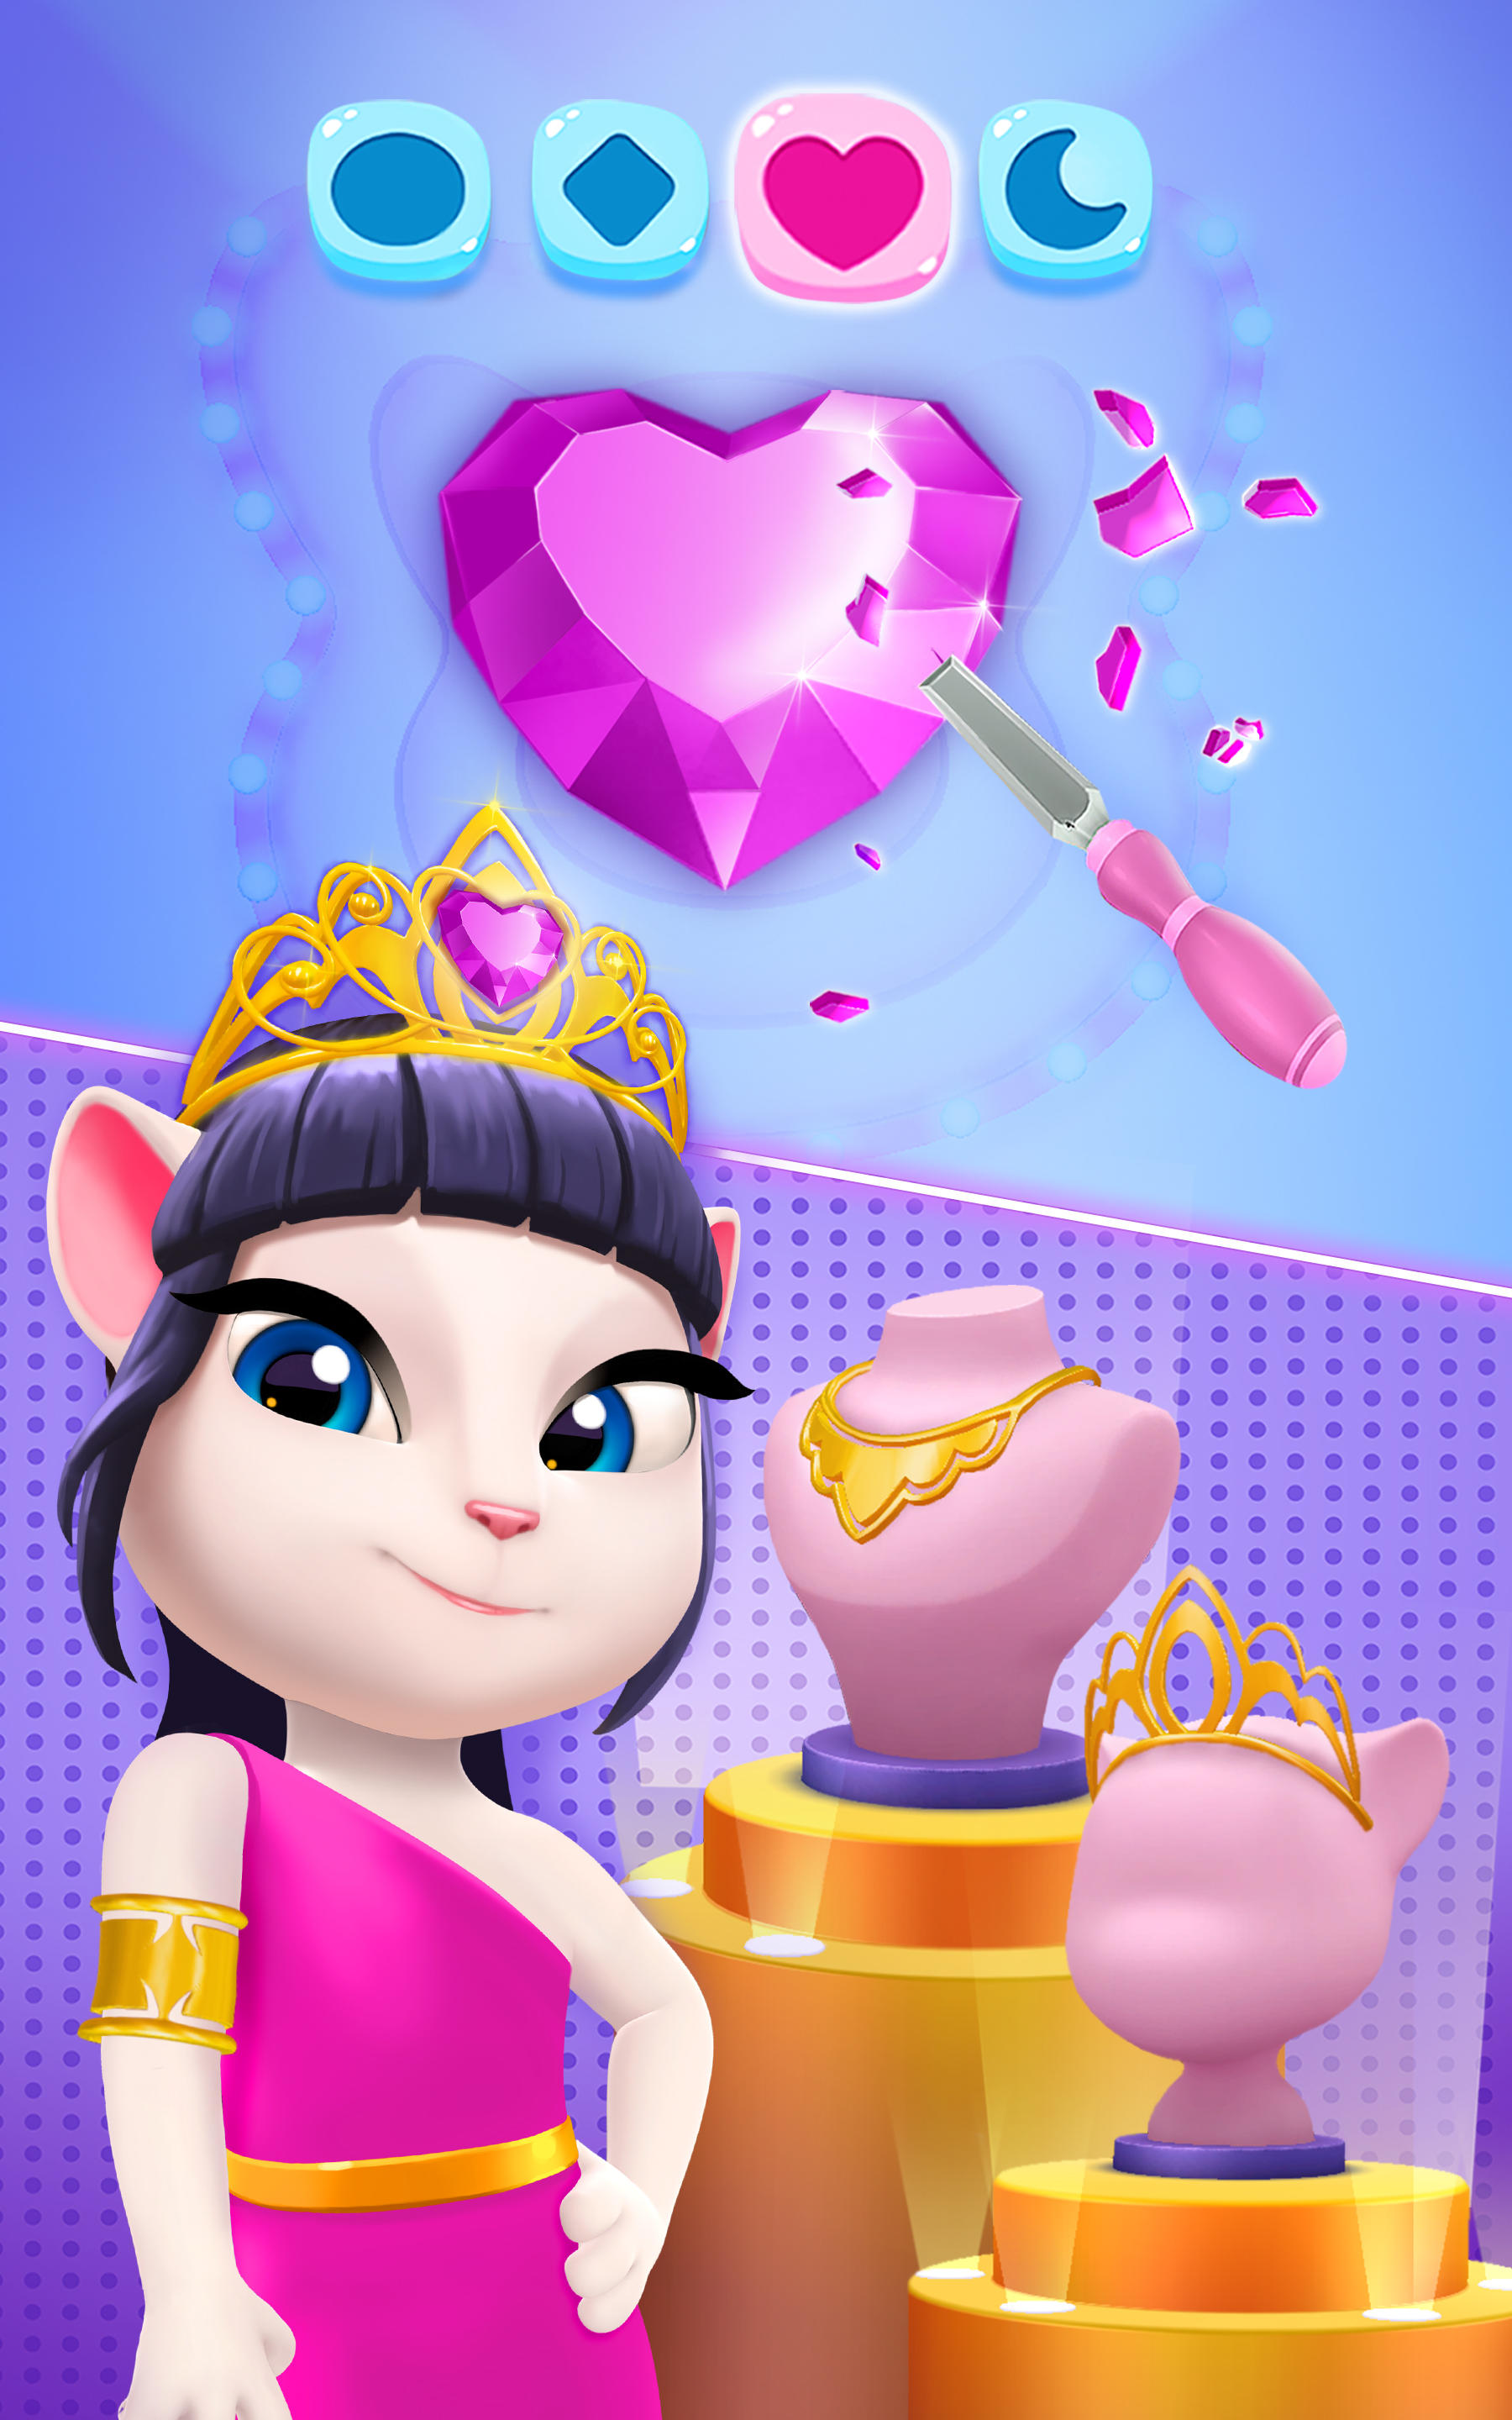 MY TALKING ANGELA 2  Kitty games, Animated characters, Mini games